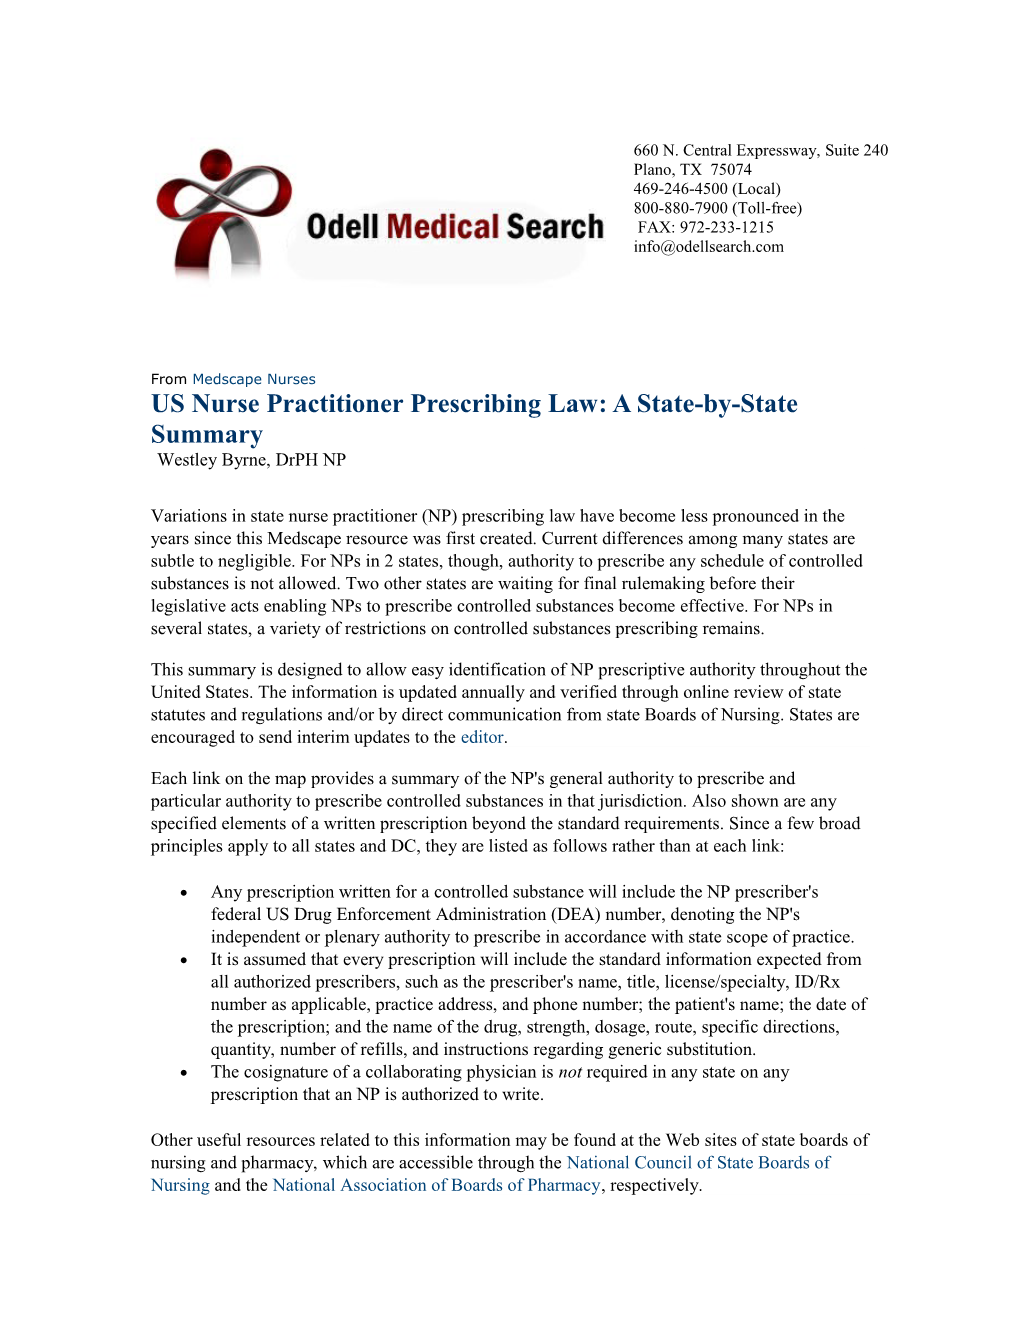 US Nurse Practitioner Prescribing Law: a State-By-State Summary